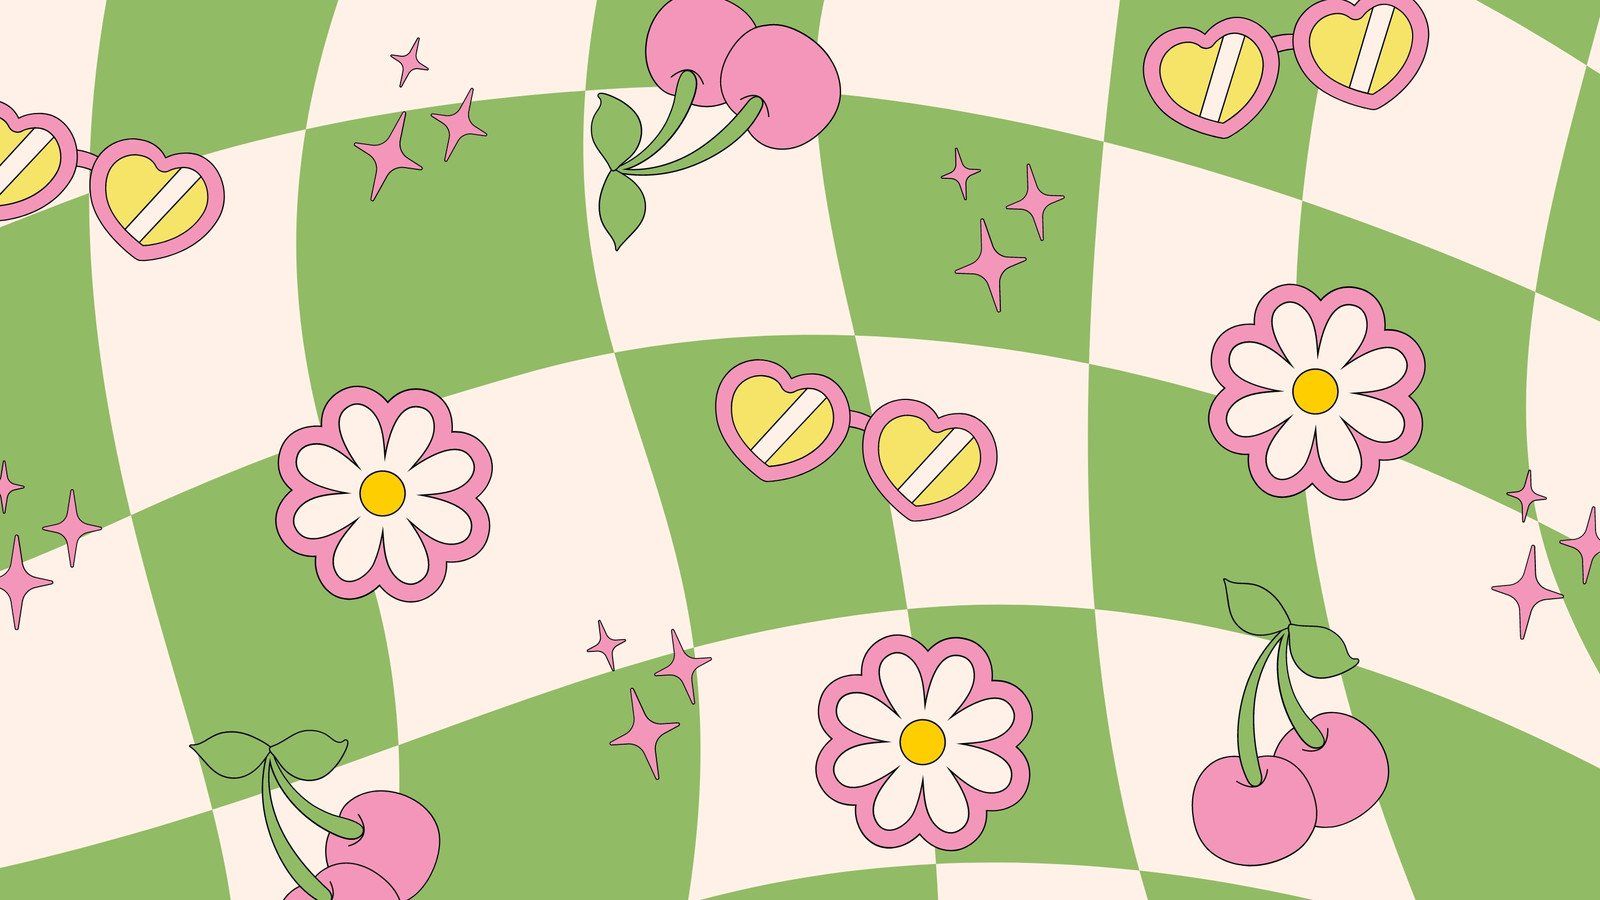 A green and pink pattern of flowers, hearts, and cherries. - Desktop, 70s, computer, happy, couple, pattern